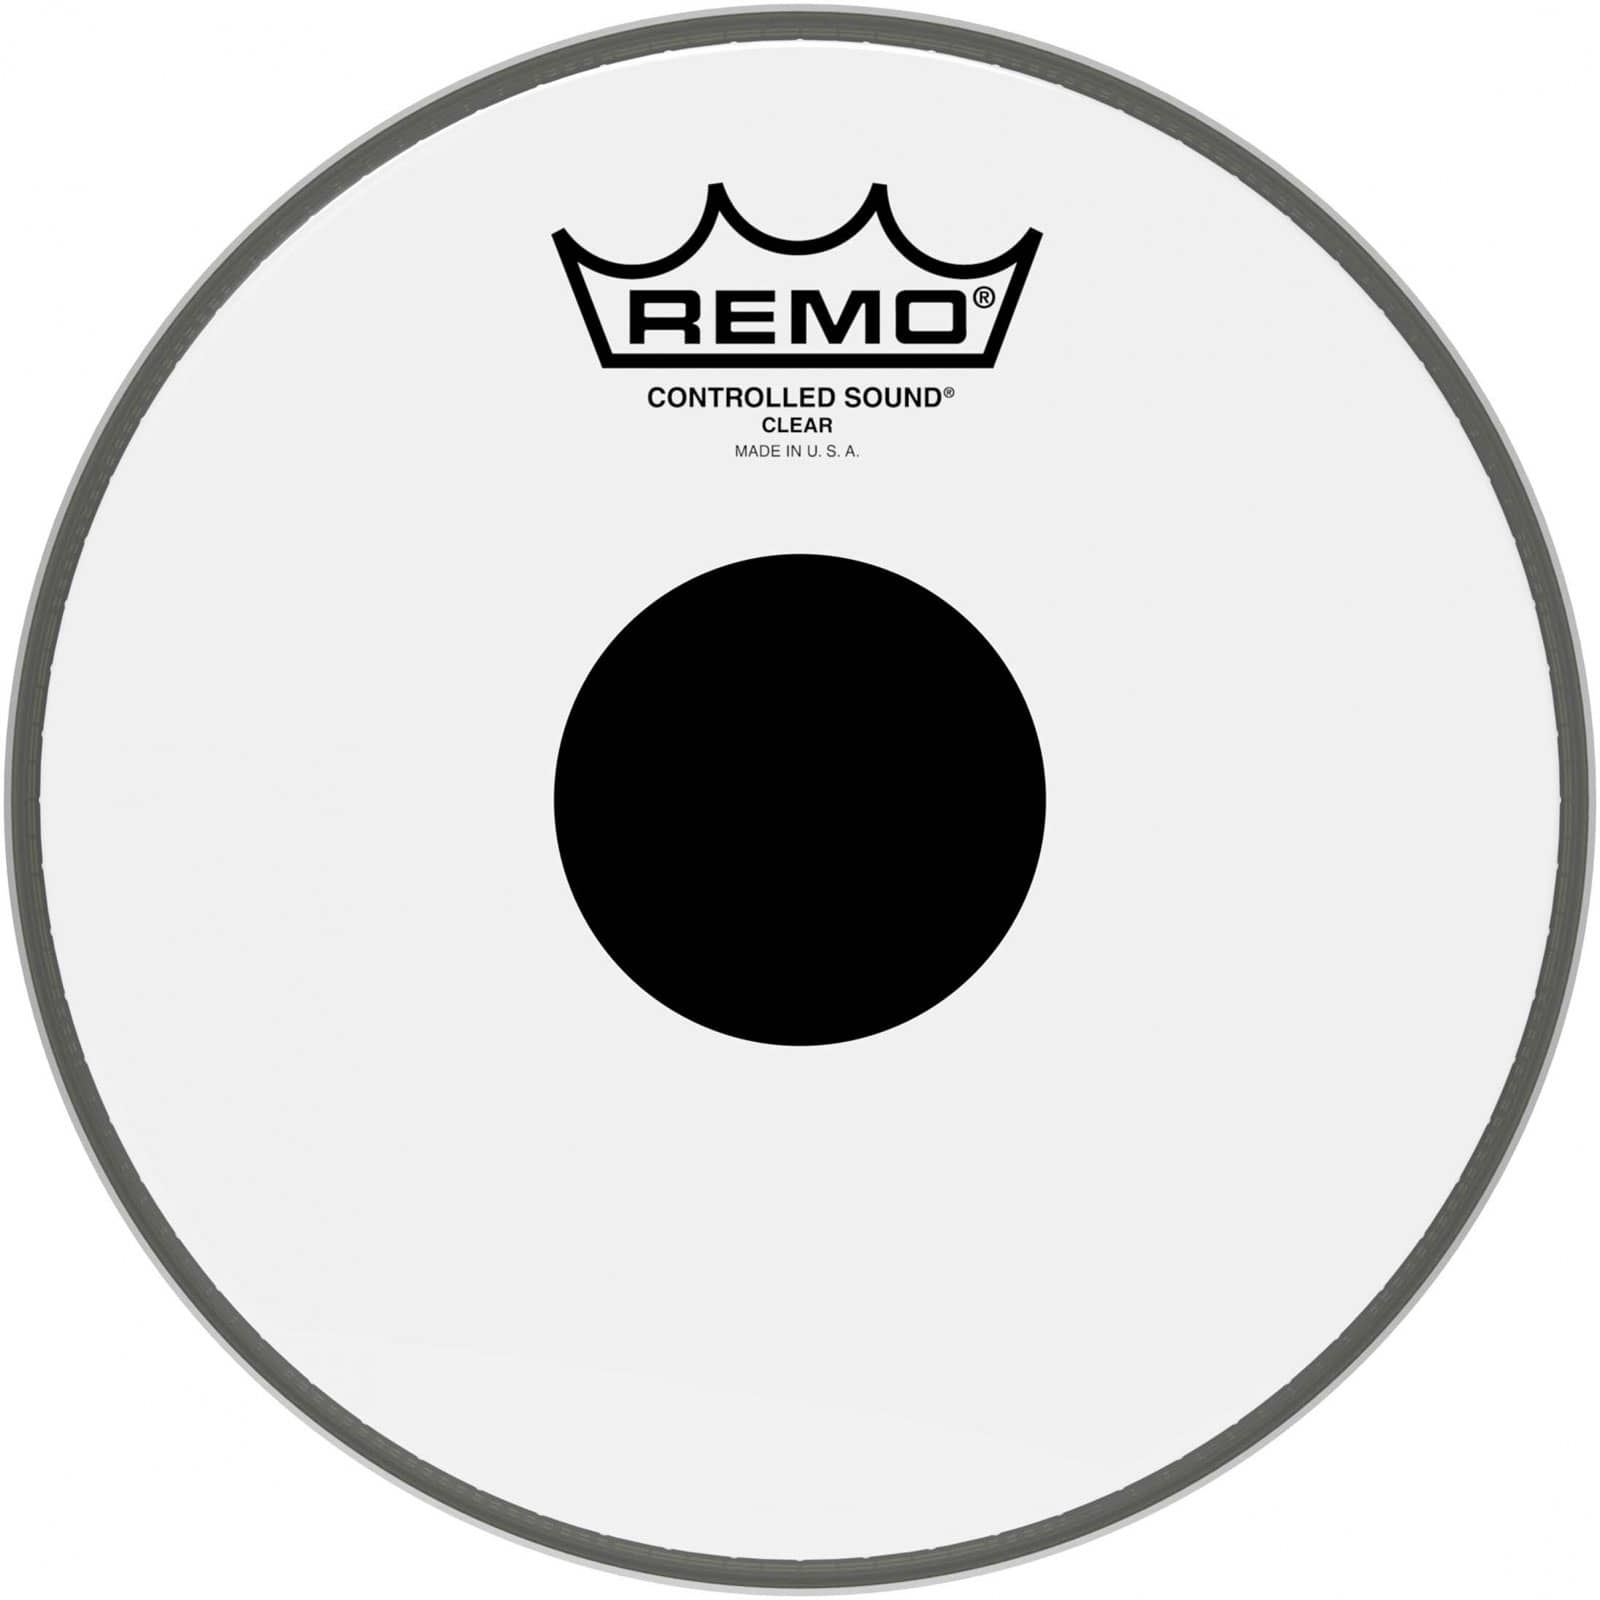 REMO CS-0308-10 - CONTROLLED SOUND CLEAR 8